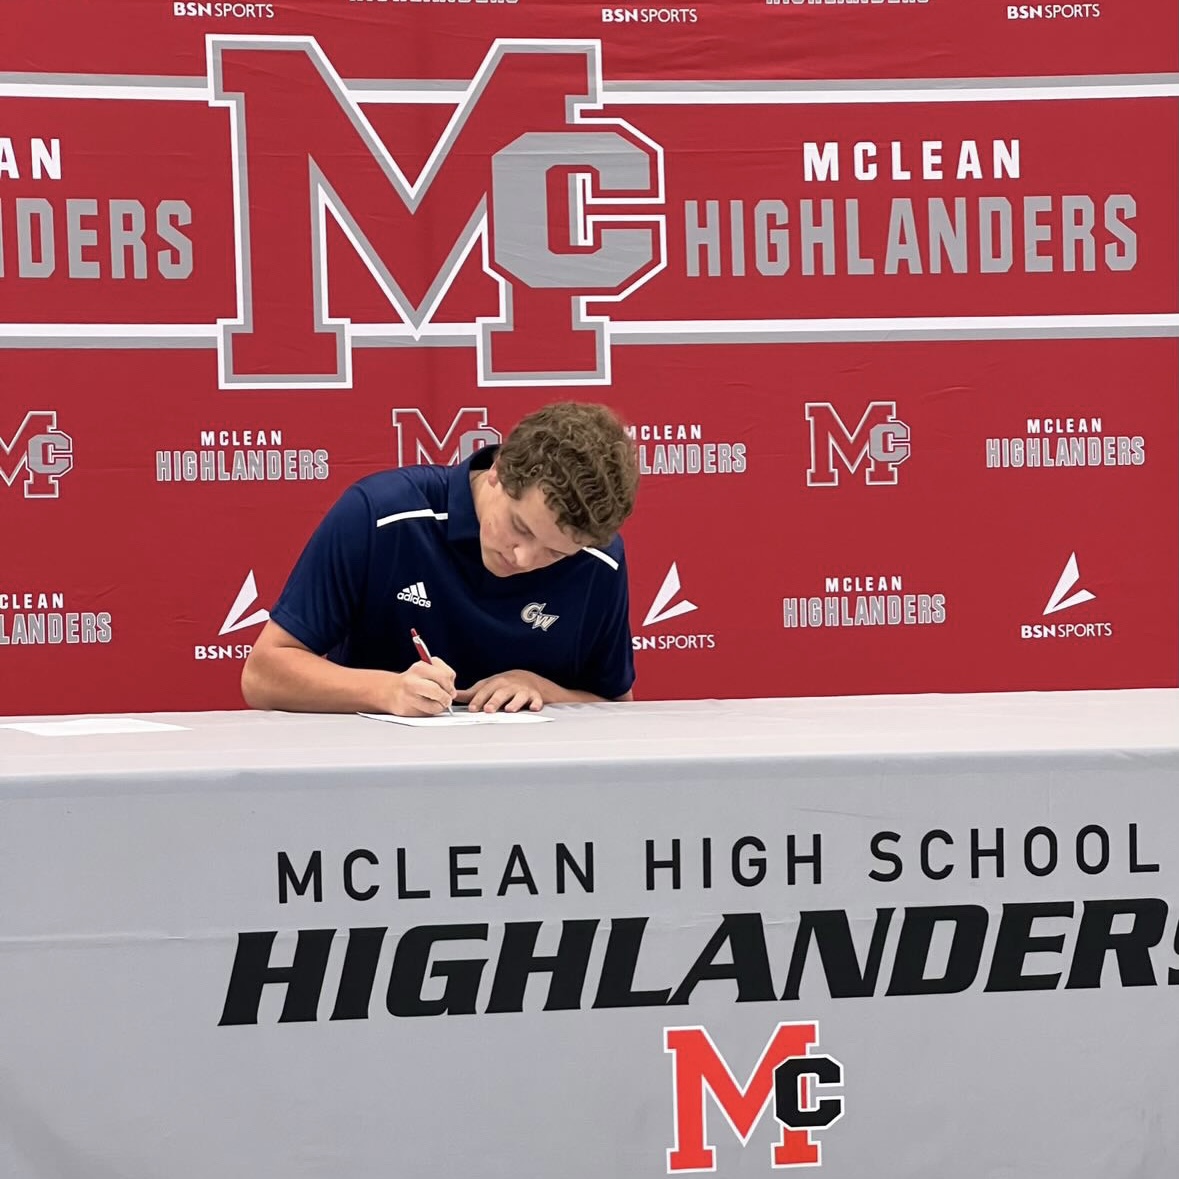 Carey+signs+his+official+National+Letter+of+Intent+to+play+baseball+at+GW+University+this+fall+at+McLeans+fall+signing+day+on+Nov.+11.